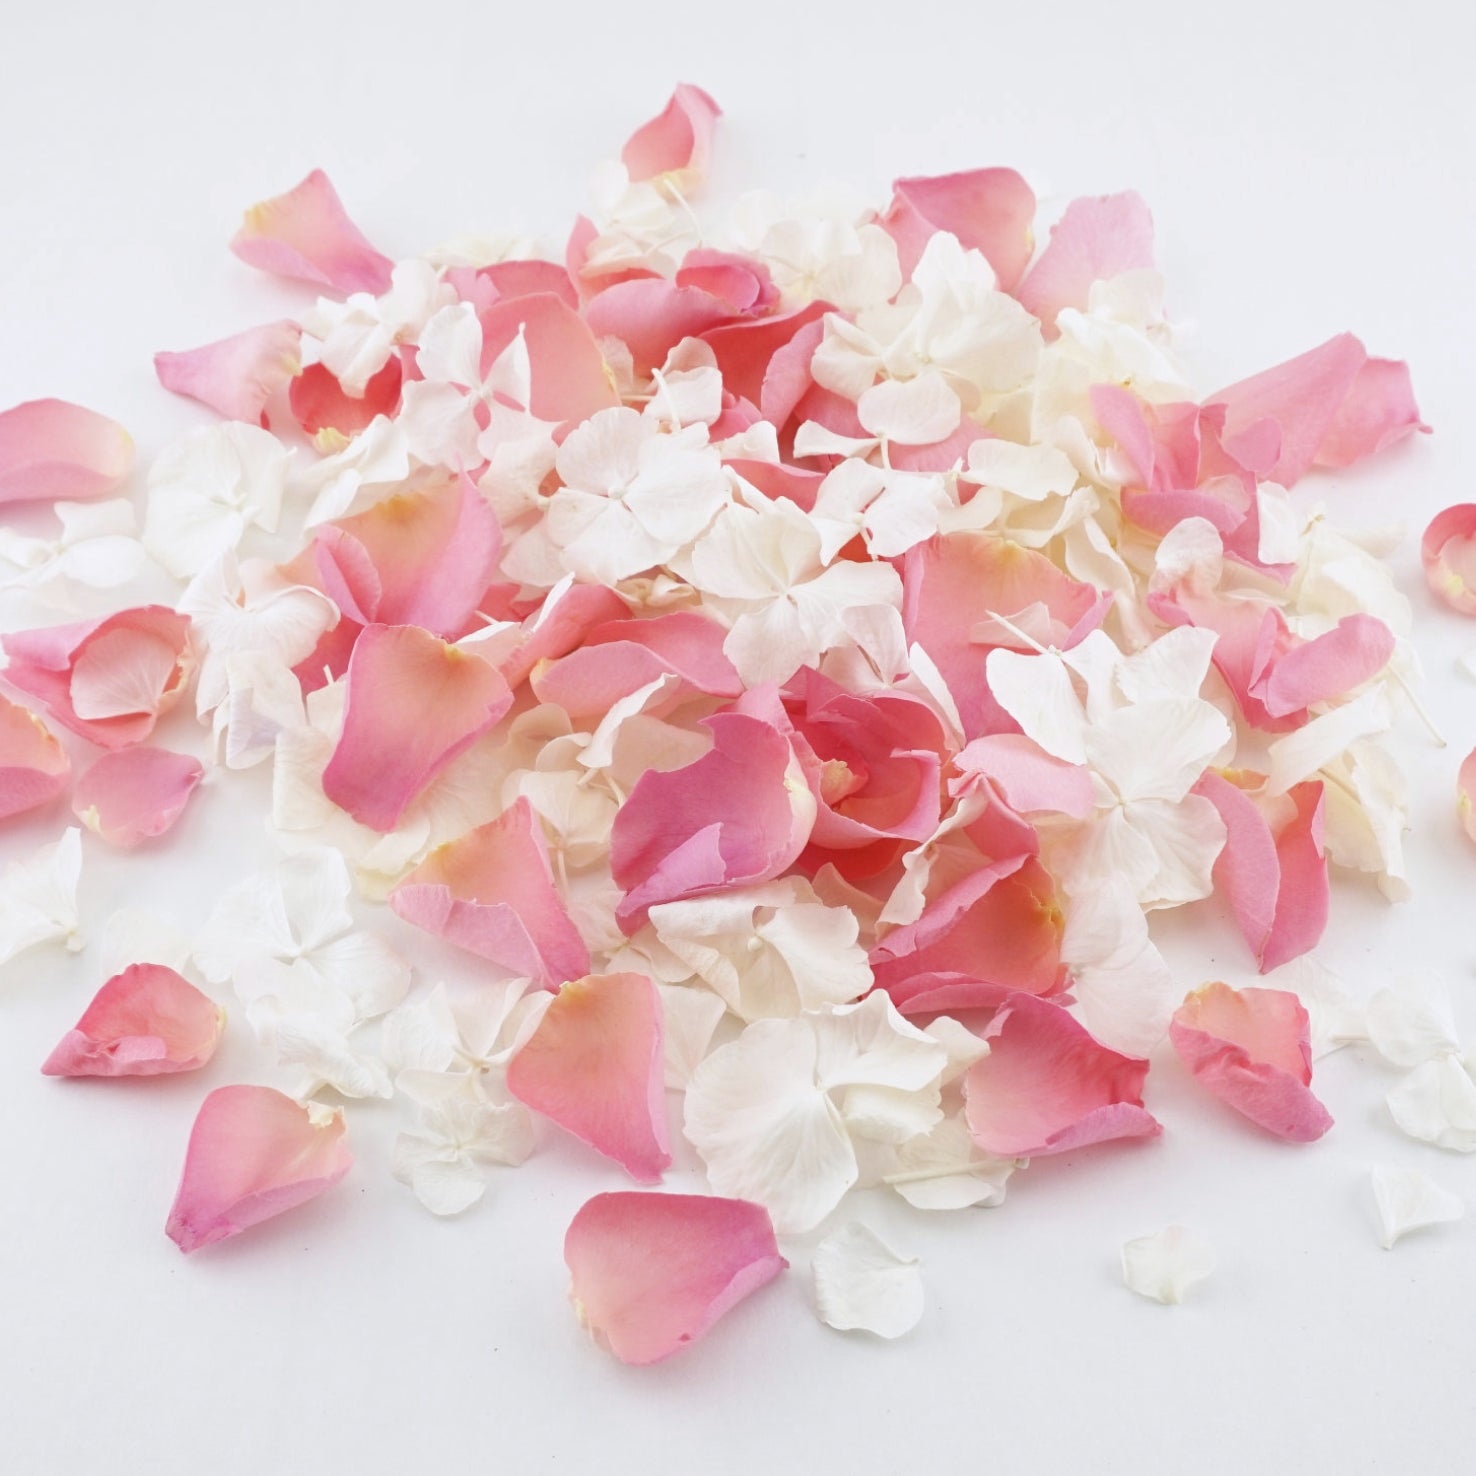  Confetti Dried Flowers and Petals - 100% Natural Wedding  Confetti Dried Flower Petals Pop Wedding and Party Decoration Biodegradable  Rose Petal Confetti (36) : Home & Kitchen